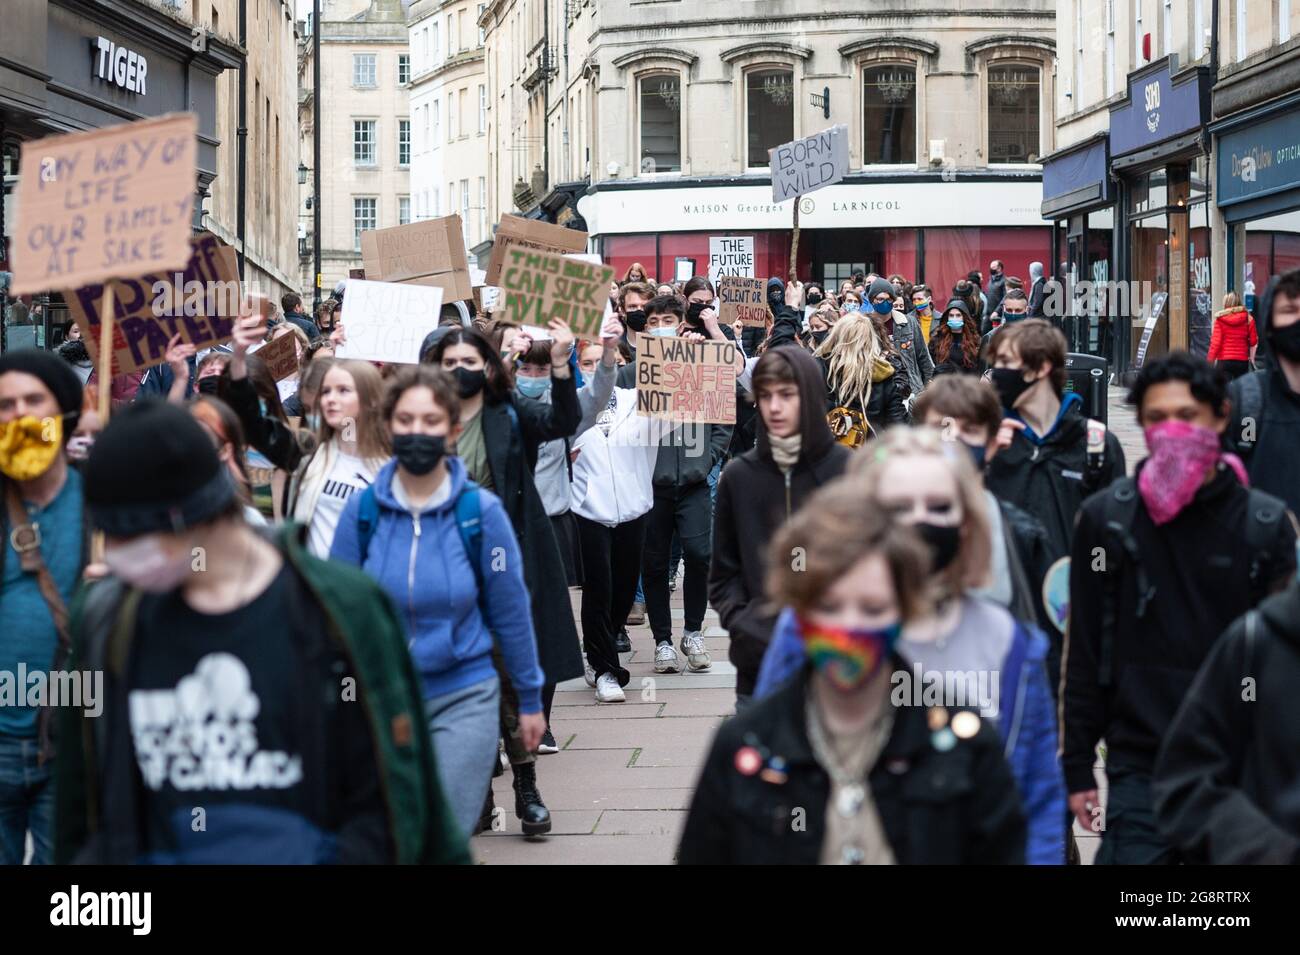 Bath, UK. 27th March 2021. Approximately 200 mostly young protesters took to the streets of historic Bath in North Somerset to demonstrate against the police & crime bill. The group of demonstrators initially gathered at Bath Abbey before marching through the streets of the city centre shouting “kill the bill” and “who's streets, our streets”. A small number of police accompanied the march which went ahead peacefully and without incident. Stock Photo